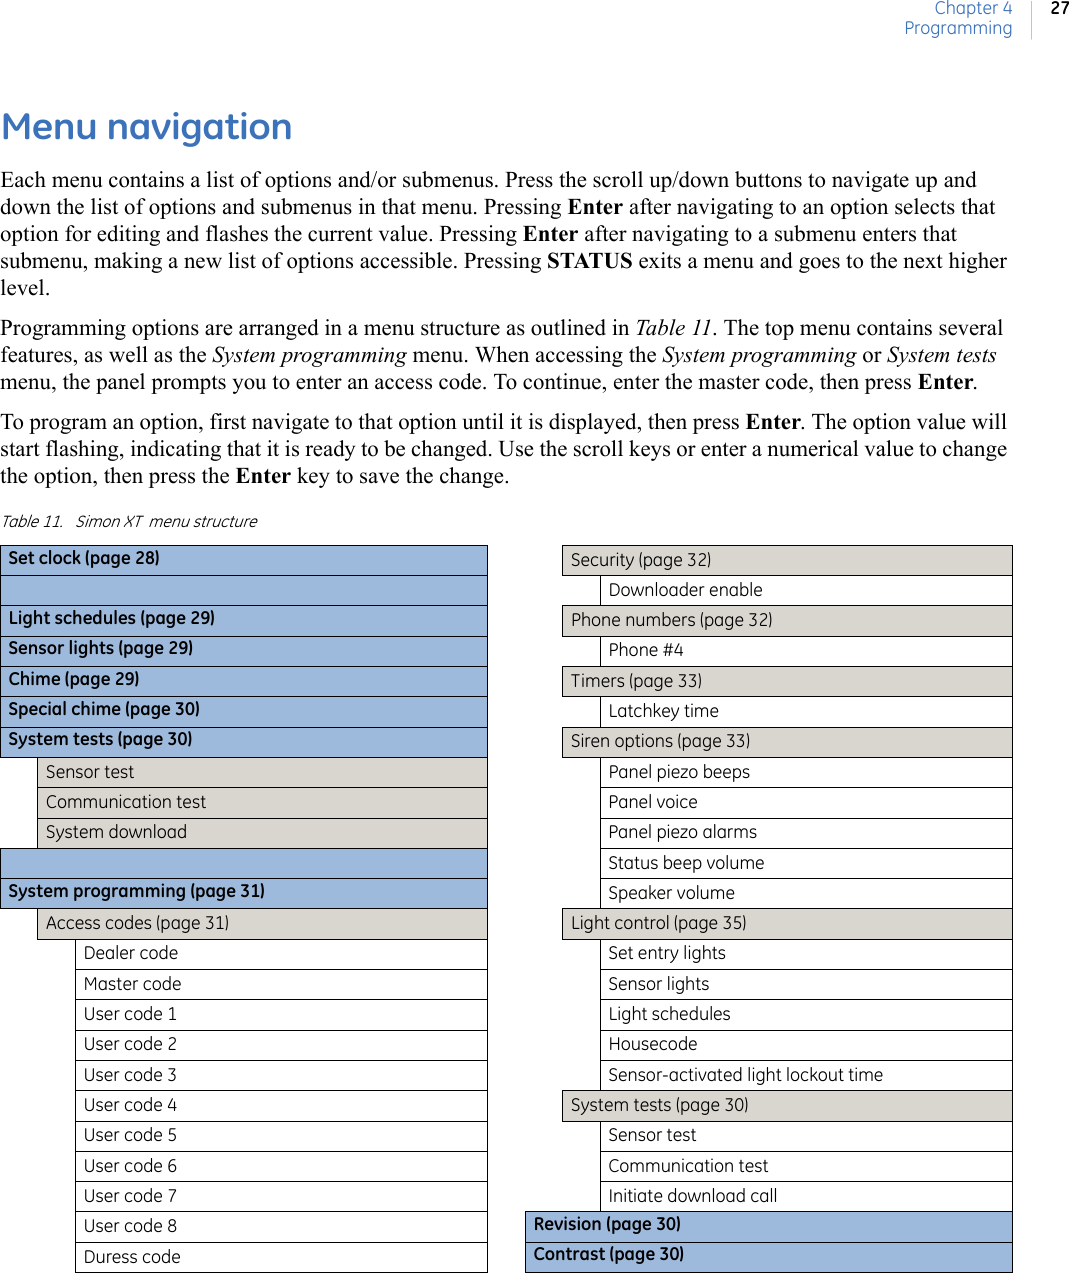 Chapter 4Programming27Menu navigationEach menu contains a list of options and/or submenus. Press the scroll up/down buttons to navigate up and down the list of options and submenus in that menu. Pressing Enter after navigating to an option selects that option for editing and flashes the current value. Pressing Enter after navigating to a submenu enters that submenu, making a new list of options accessible. Pressing STATUS exits a menu and goes to the next higher level. Programming options are arranged in a menu structure as outlined in Table 11. The top menu contains several features, as well as the System programming menu. When accessing the System programming or System tests menu, the panel prompts you to enter an access code. To continue, enter the master code, then press Enter.To program an option, first navigate to that option until it is displayed, then press Enter. The option value will start flashing, indicating that it is ready to be changed. Use the scroll keys or enter a numerical value to change the option, then press the Enter key to save the change.   Table 11. Simon XT  menu structureSet clock (page 28) Security (page 32)Downloader enableLight schedules (page 29) Phone numbers (page 32)Sensor lights (page 29) Phone #4Chime (page 29) Timers (page 33)Special chime (page 30) Latchkey timeSystem tests (page 30) Siren options (page 33)Sensor test  Panel piezo beepsCommunication test Panel voiceSystem download  Panel piezo alarmsStatus beep volumeSystem programming (page 31) Speaker volumeAccess codes (page 31) Light control (page 35)Dealer code Set entry lightsMaster code Sensor lightsUser code 1 Light schedulesUser code 2 HousecodeUser code 3 Sensor-activated light lockout timeUser code 4 System tests (page 30)User code 5 Sensor testUser code 6 Communication testUser code 7 Initiate download callUser code 8 Revision (page 30)Duress code Contrast (page 30)